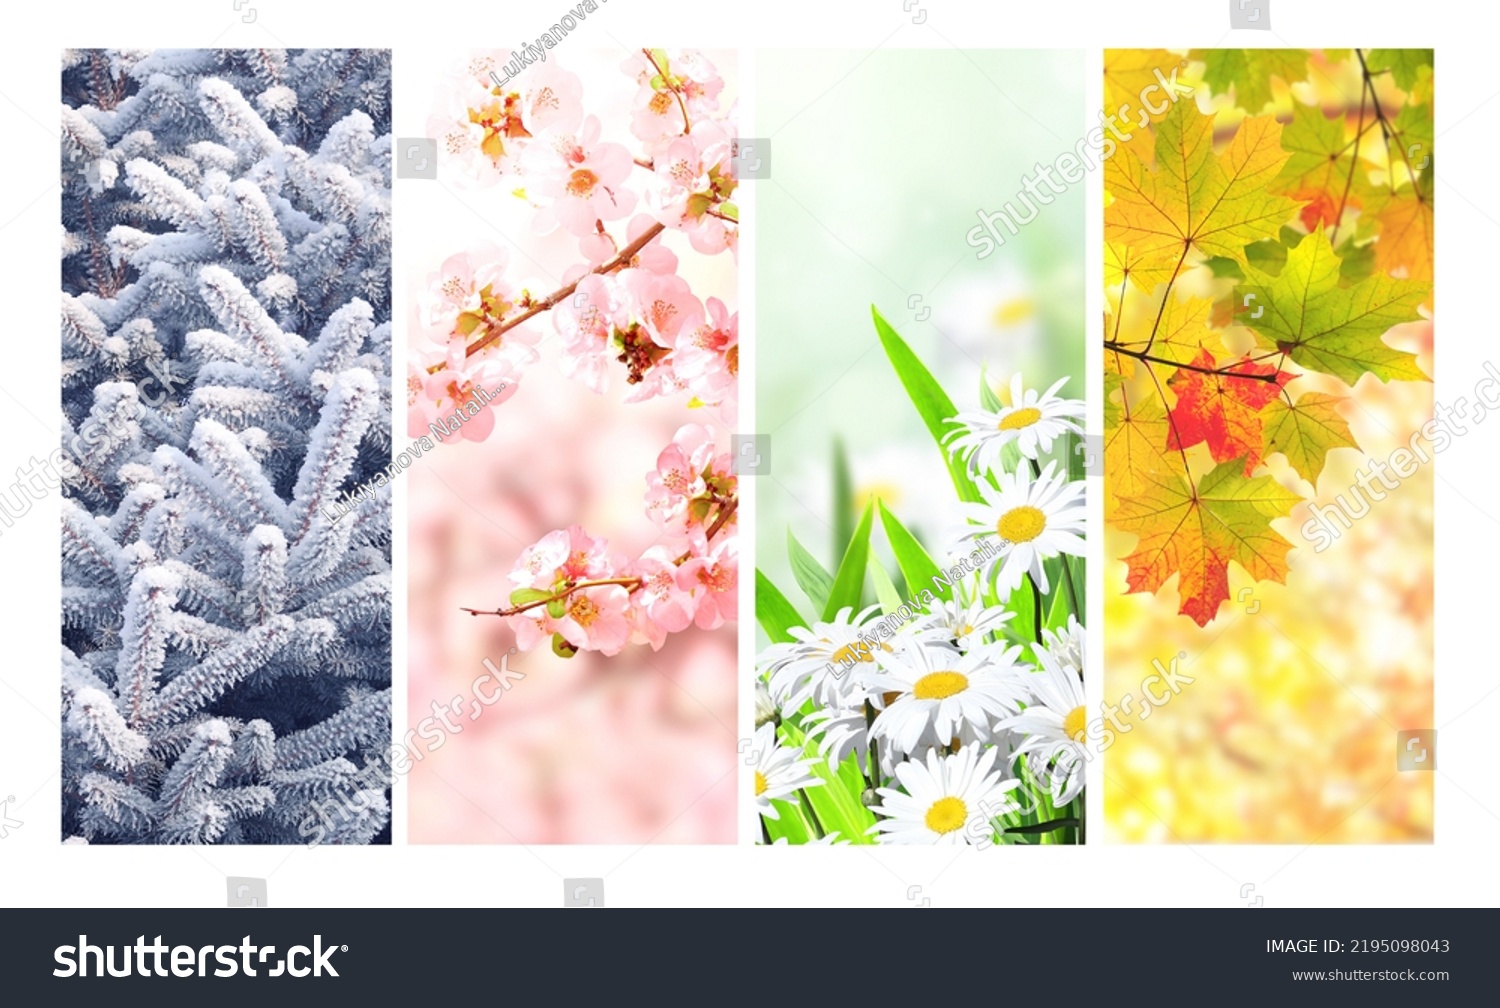 Four seasons of year. Set of vertical nature banners with winter, spring, summer and autumn scenes. Nature collage with seasonal scenics. Copy space for text #2195098043